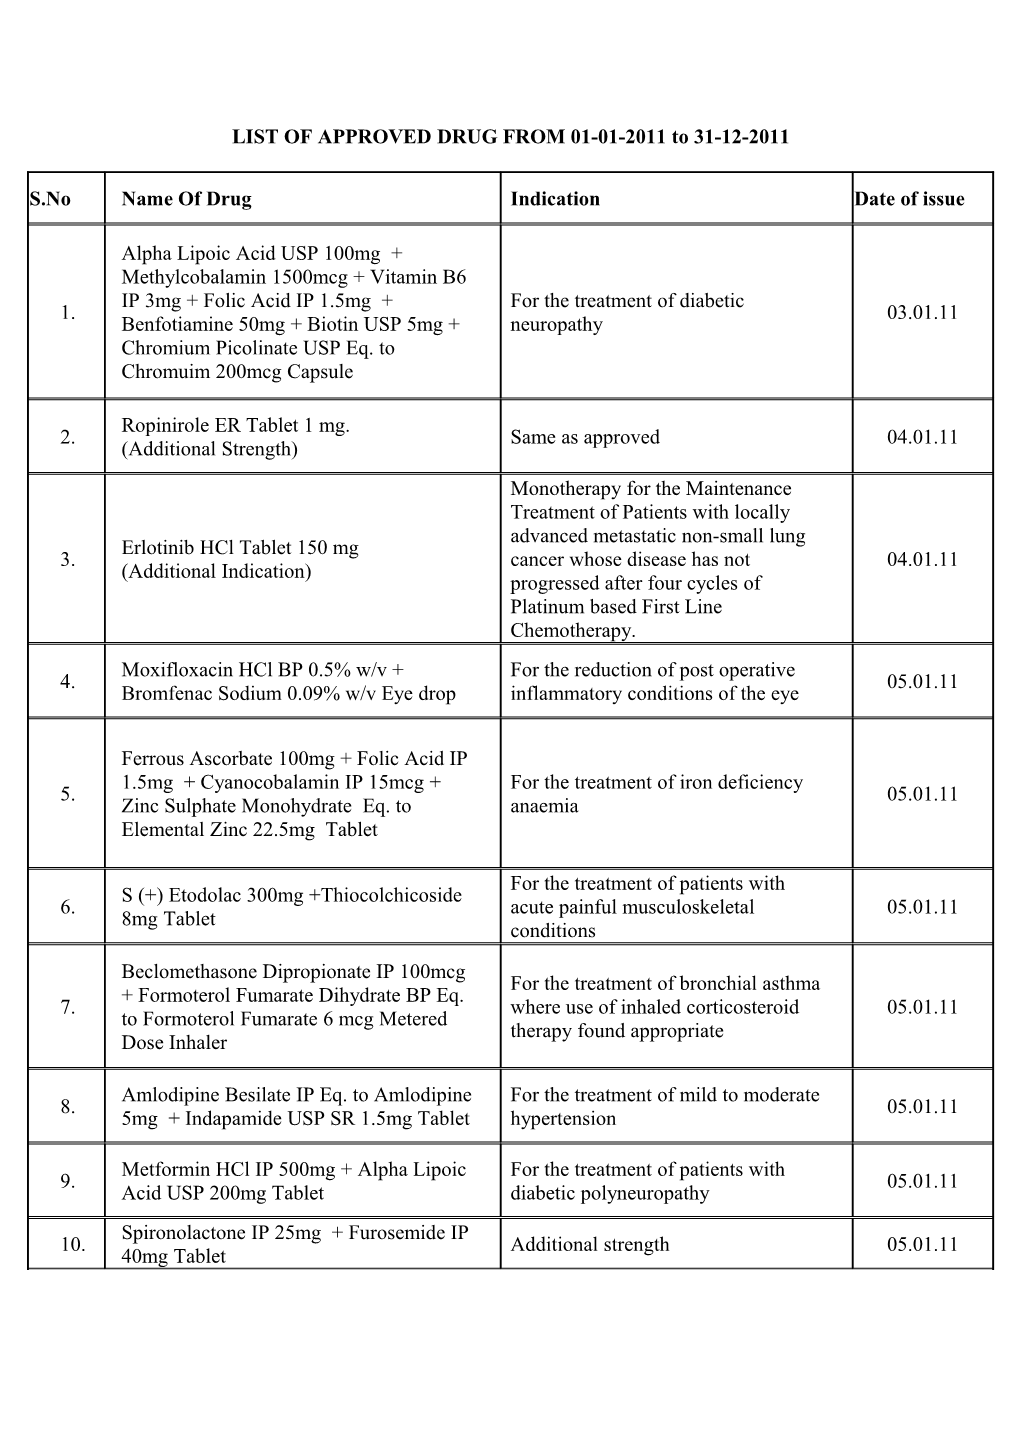 LIST of APPROVED DRUG from 01-01-2011 to 31-12-2011